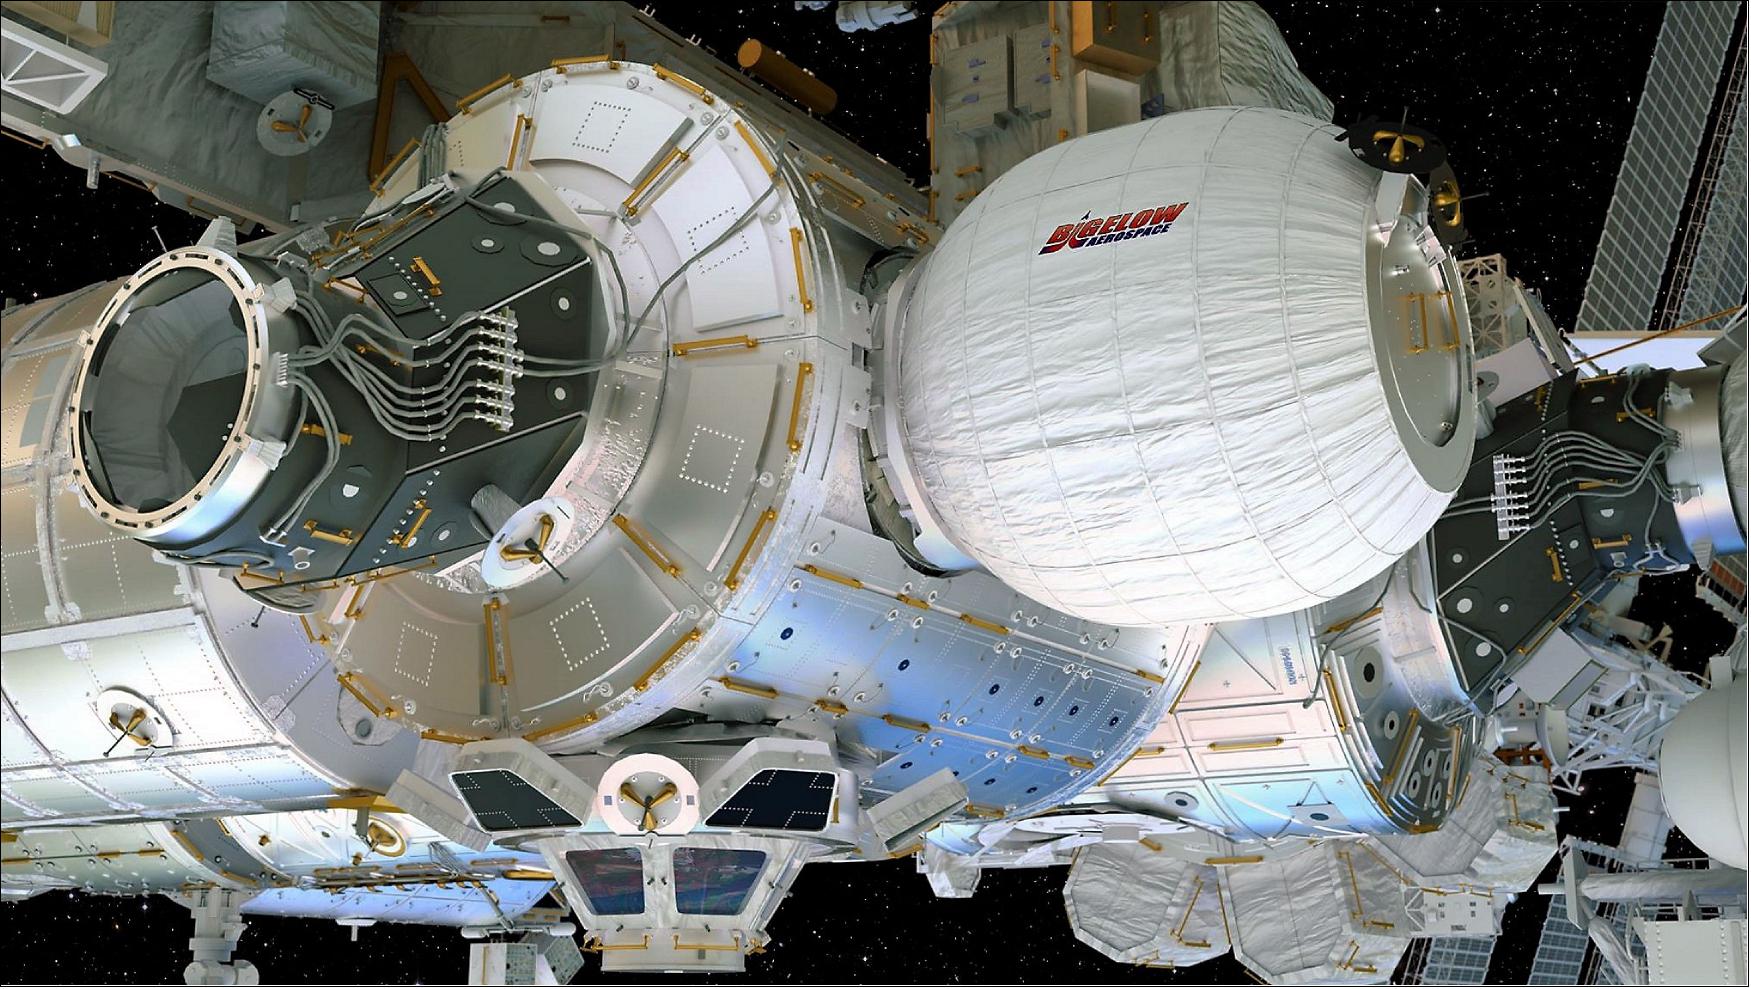 Figure 15: This artist’s concept depicts the BEAM attached to the International Space Station’s Tranquility module. The Cupola on Tranquility (bottom) with its 6 windows around its sides and another in the center provides a 360º view around the station (image credit: Bigelow Aerospace)